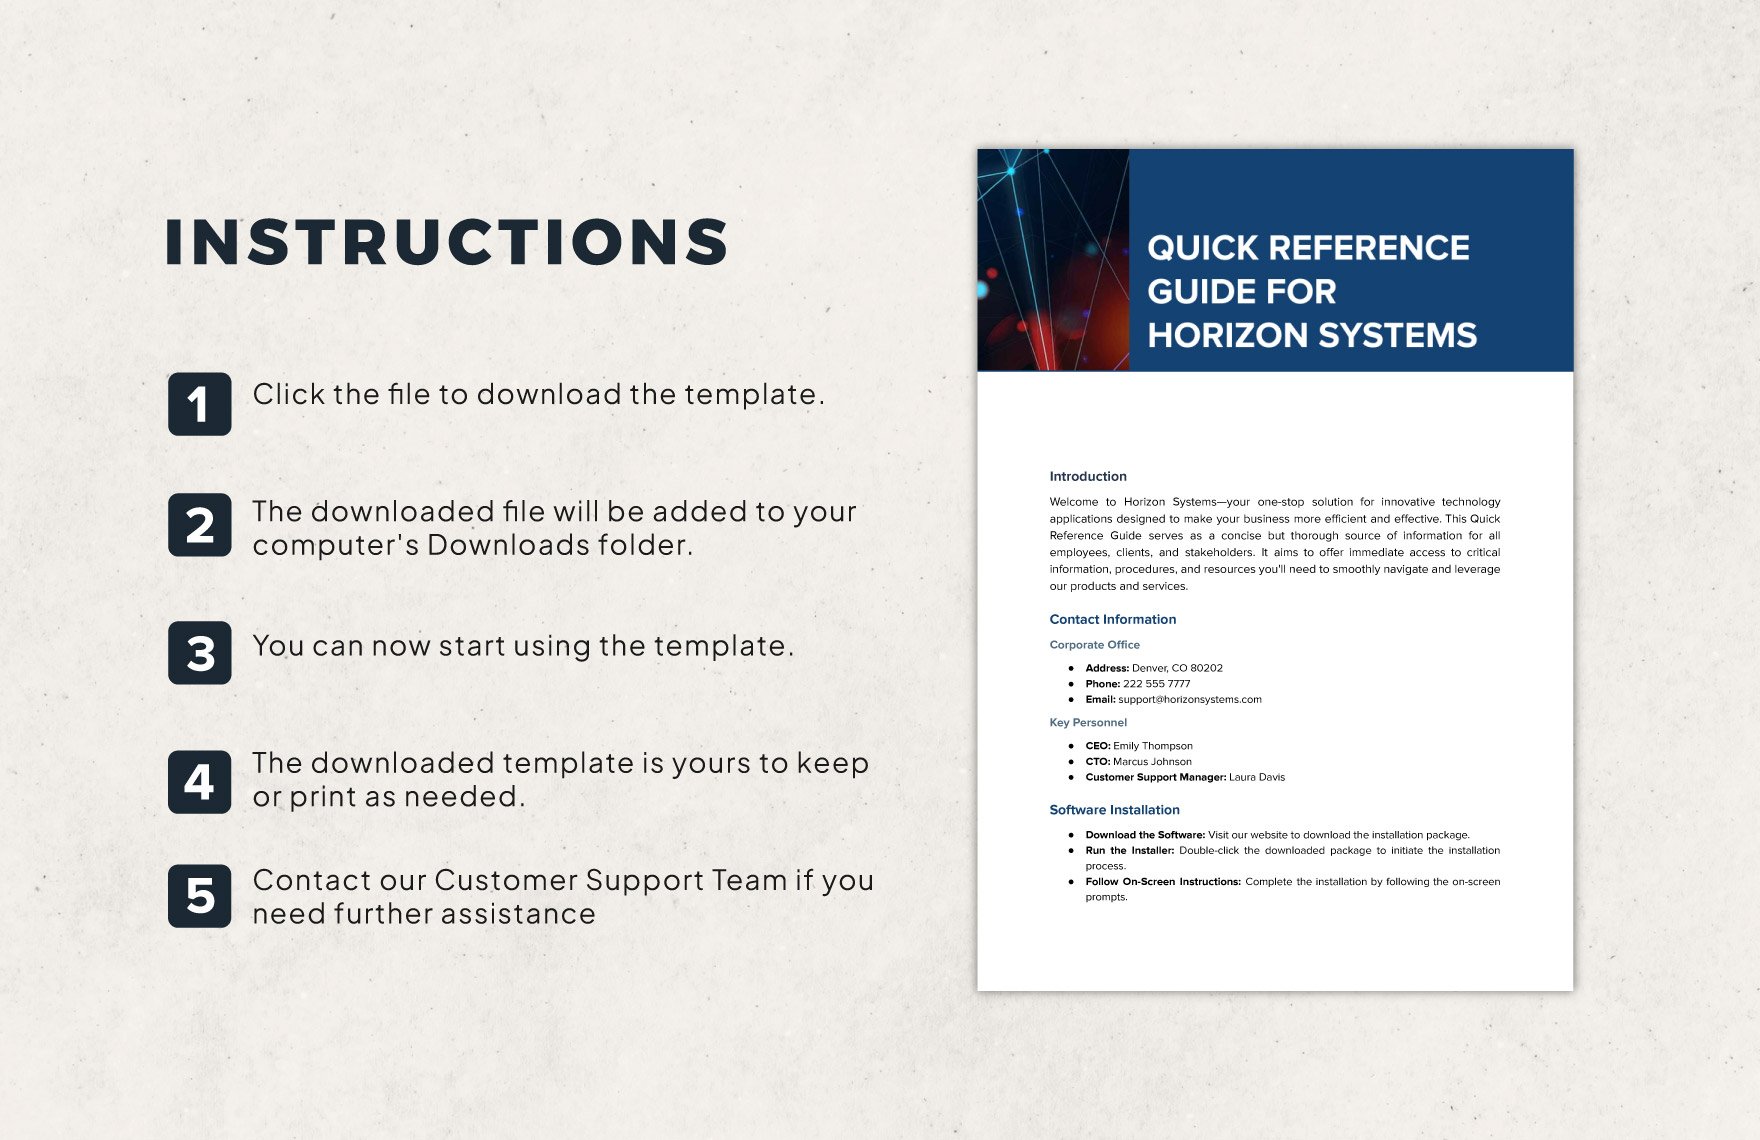 Quick Reference Guide Template